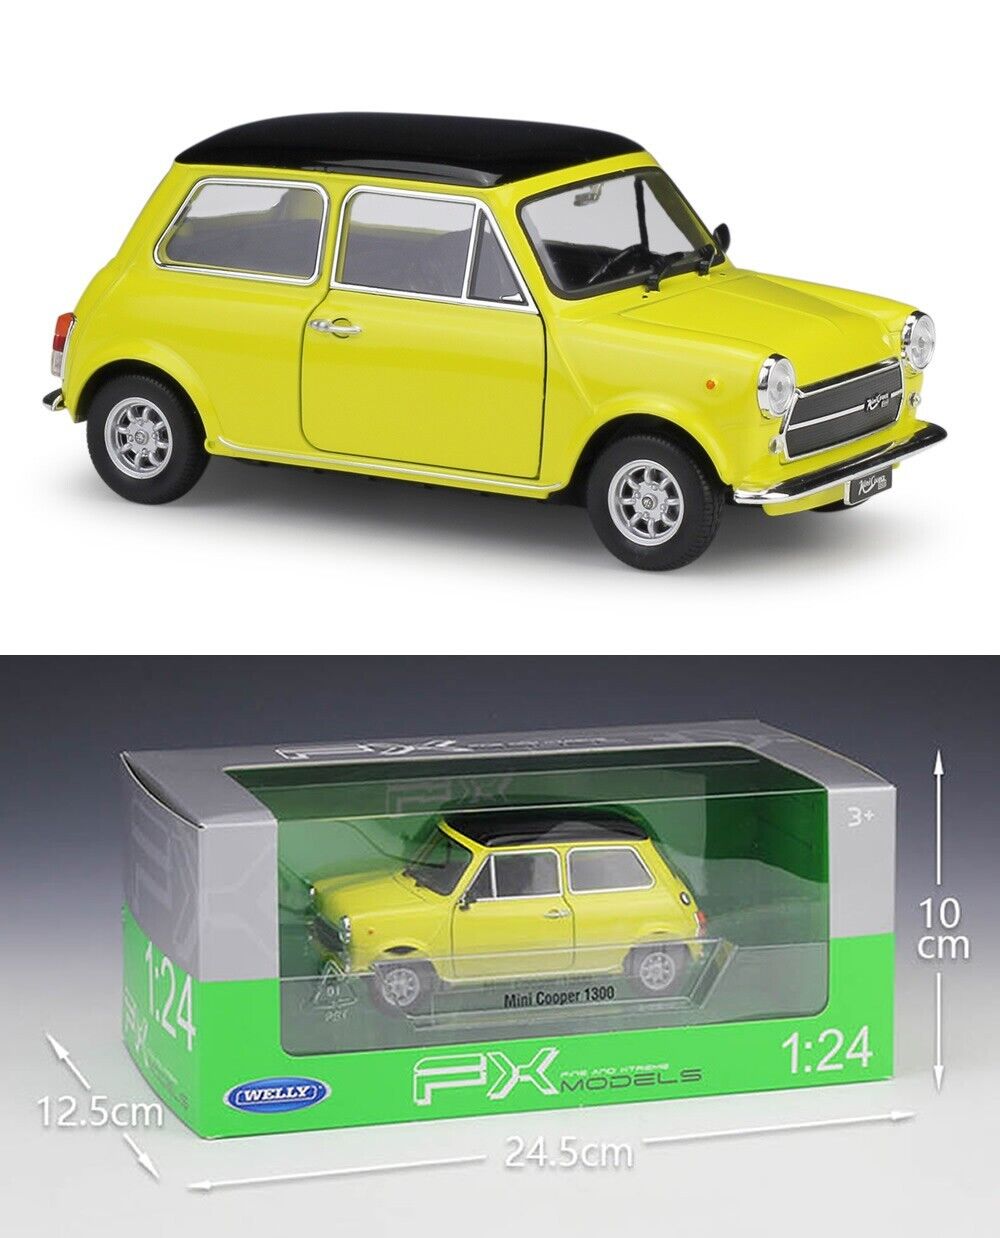 WELLY 1:24 MINI COOPER 1300 Alloy Diecast vehicle Car MODEL Gift Collection